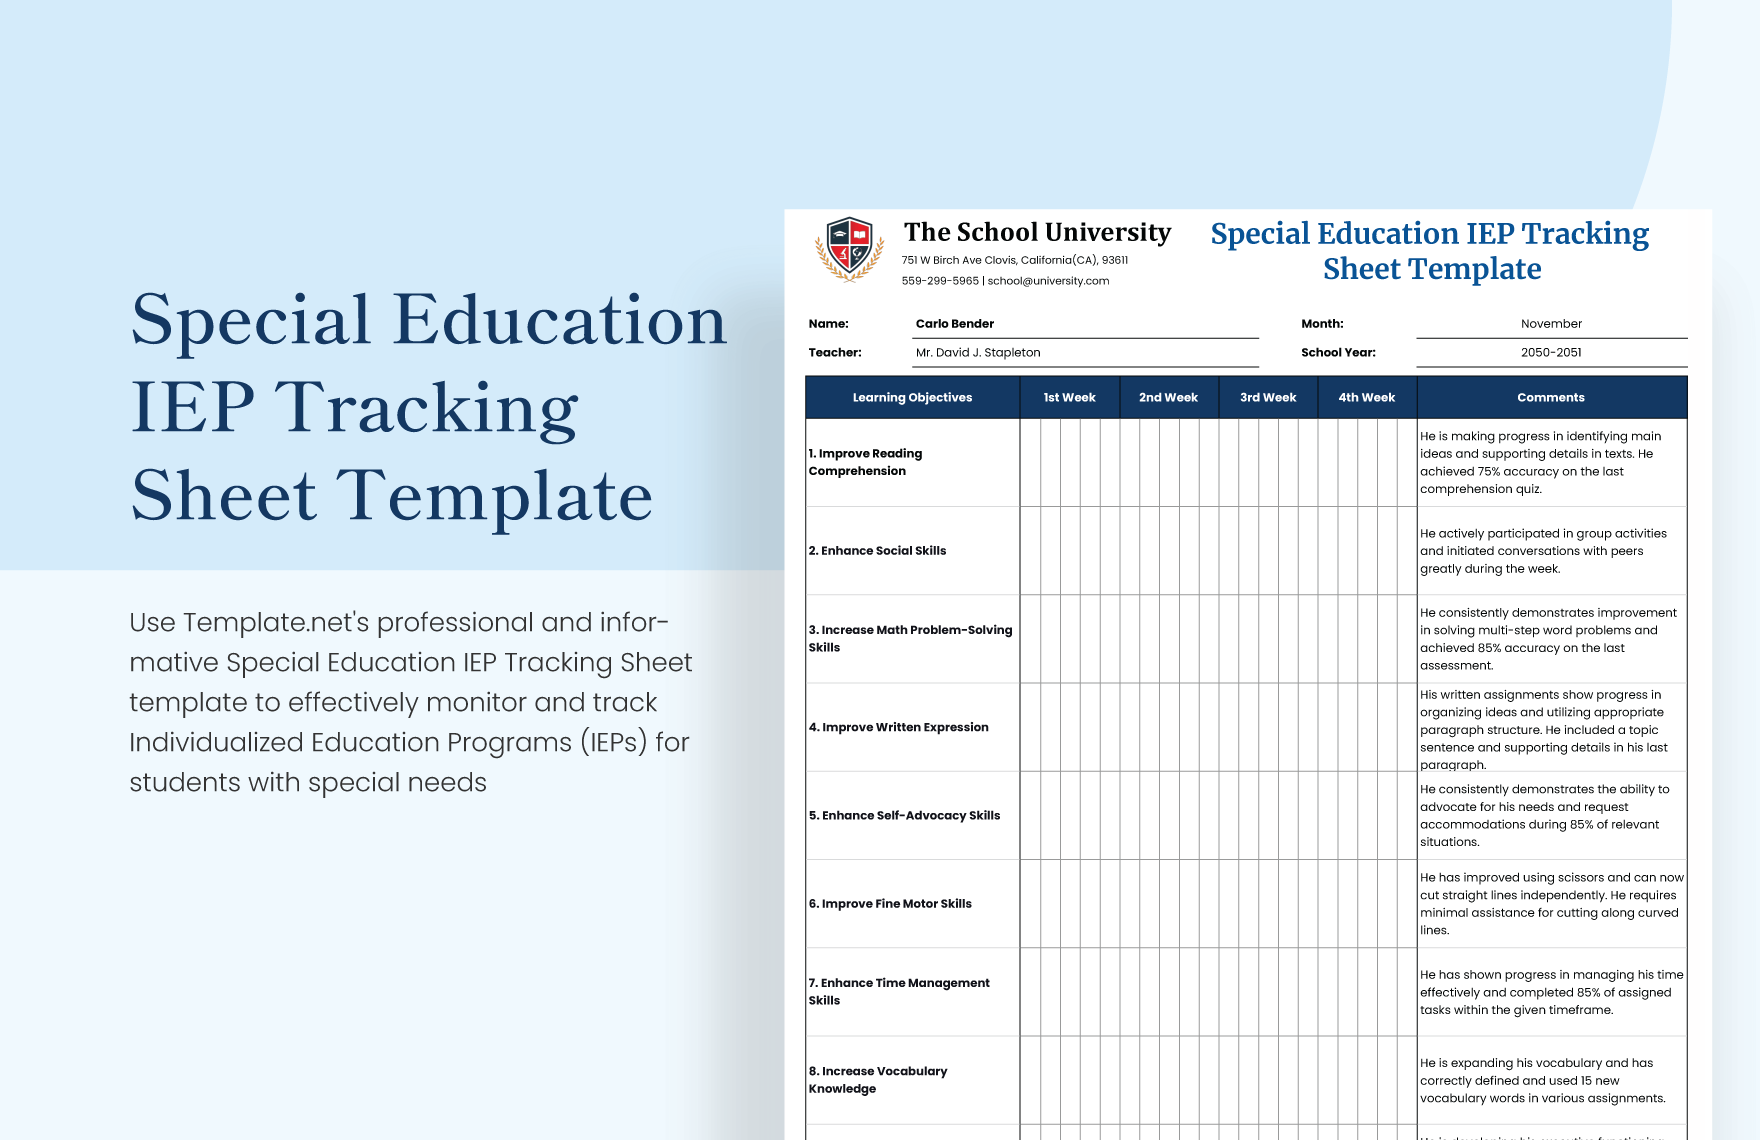 Special Education IEP Tracking Sheet Template